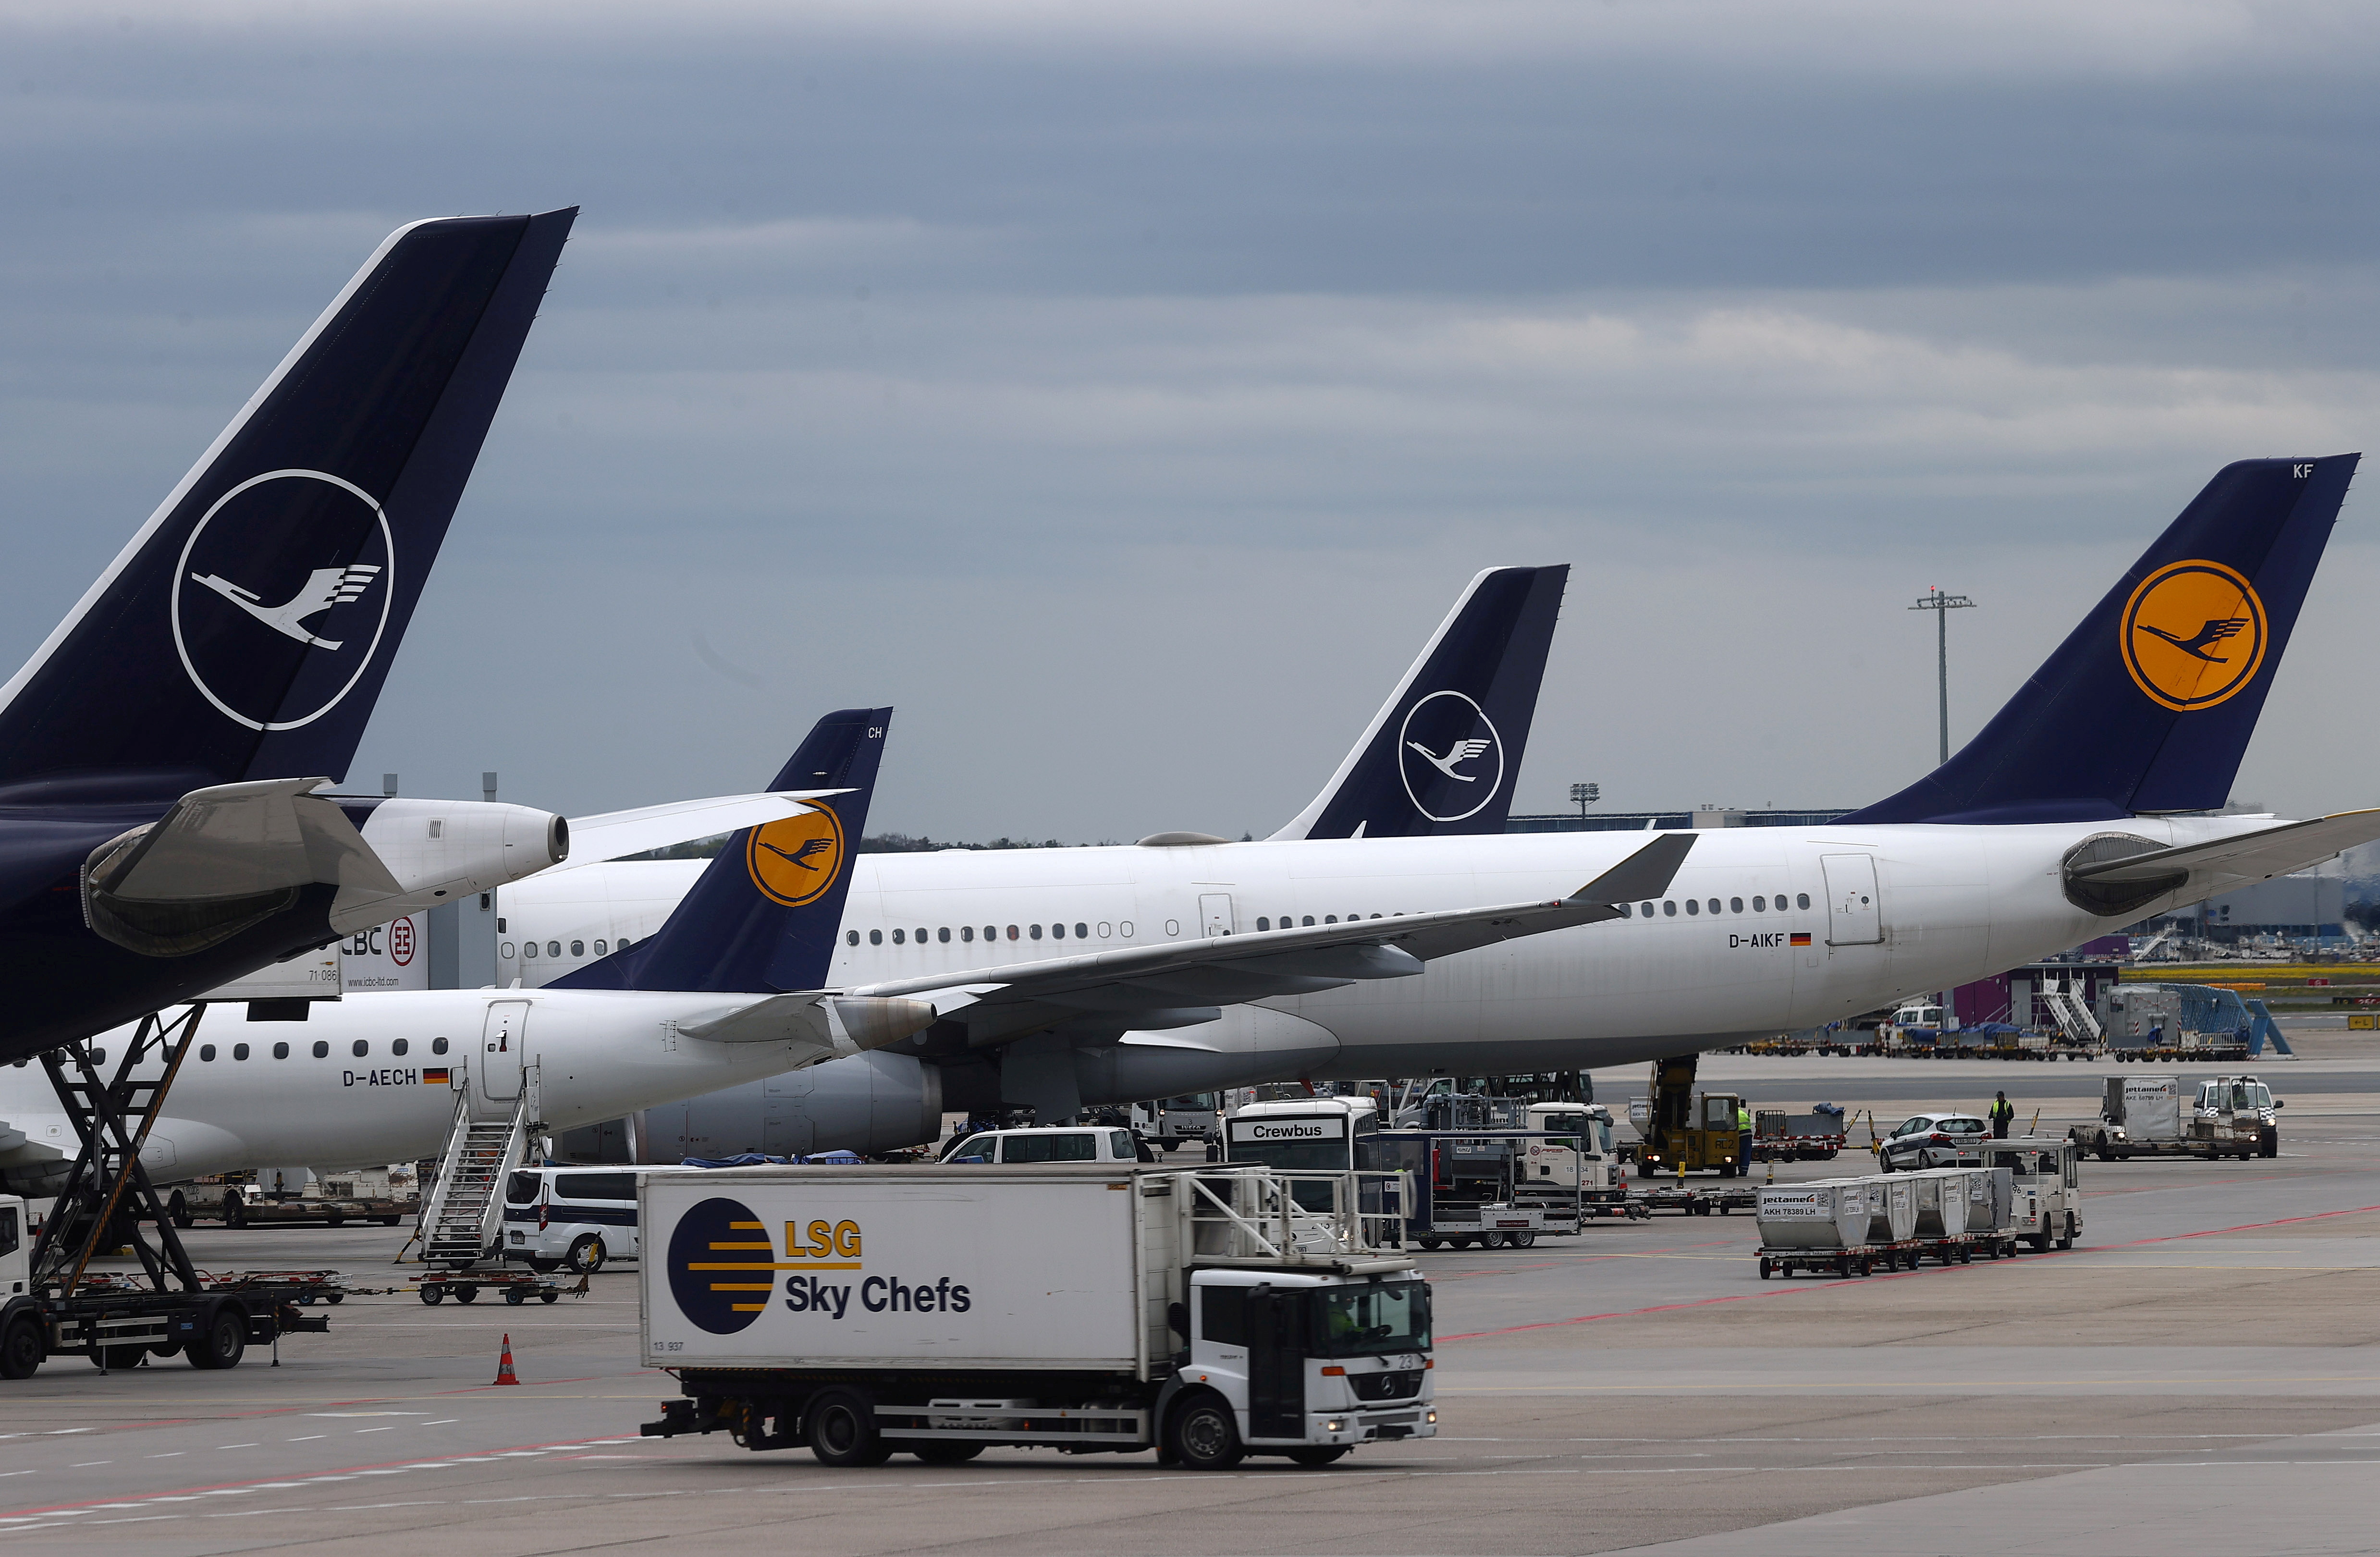 Planes of German air carrier Lufthansa are photographed at the day of the airline's annual general meeting at the airport in Frankfurt, Germany, May 4, 2021.  REUTERS/Kai Pfaffenbach